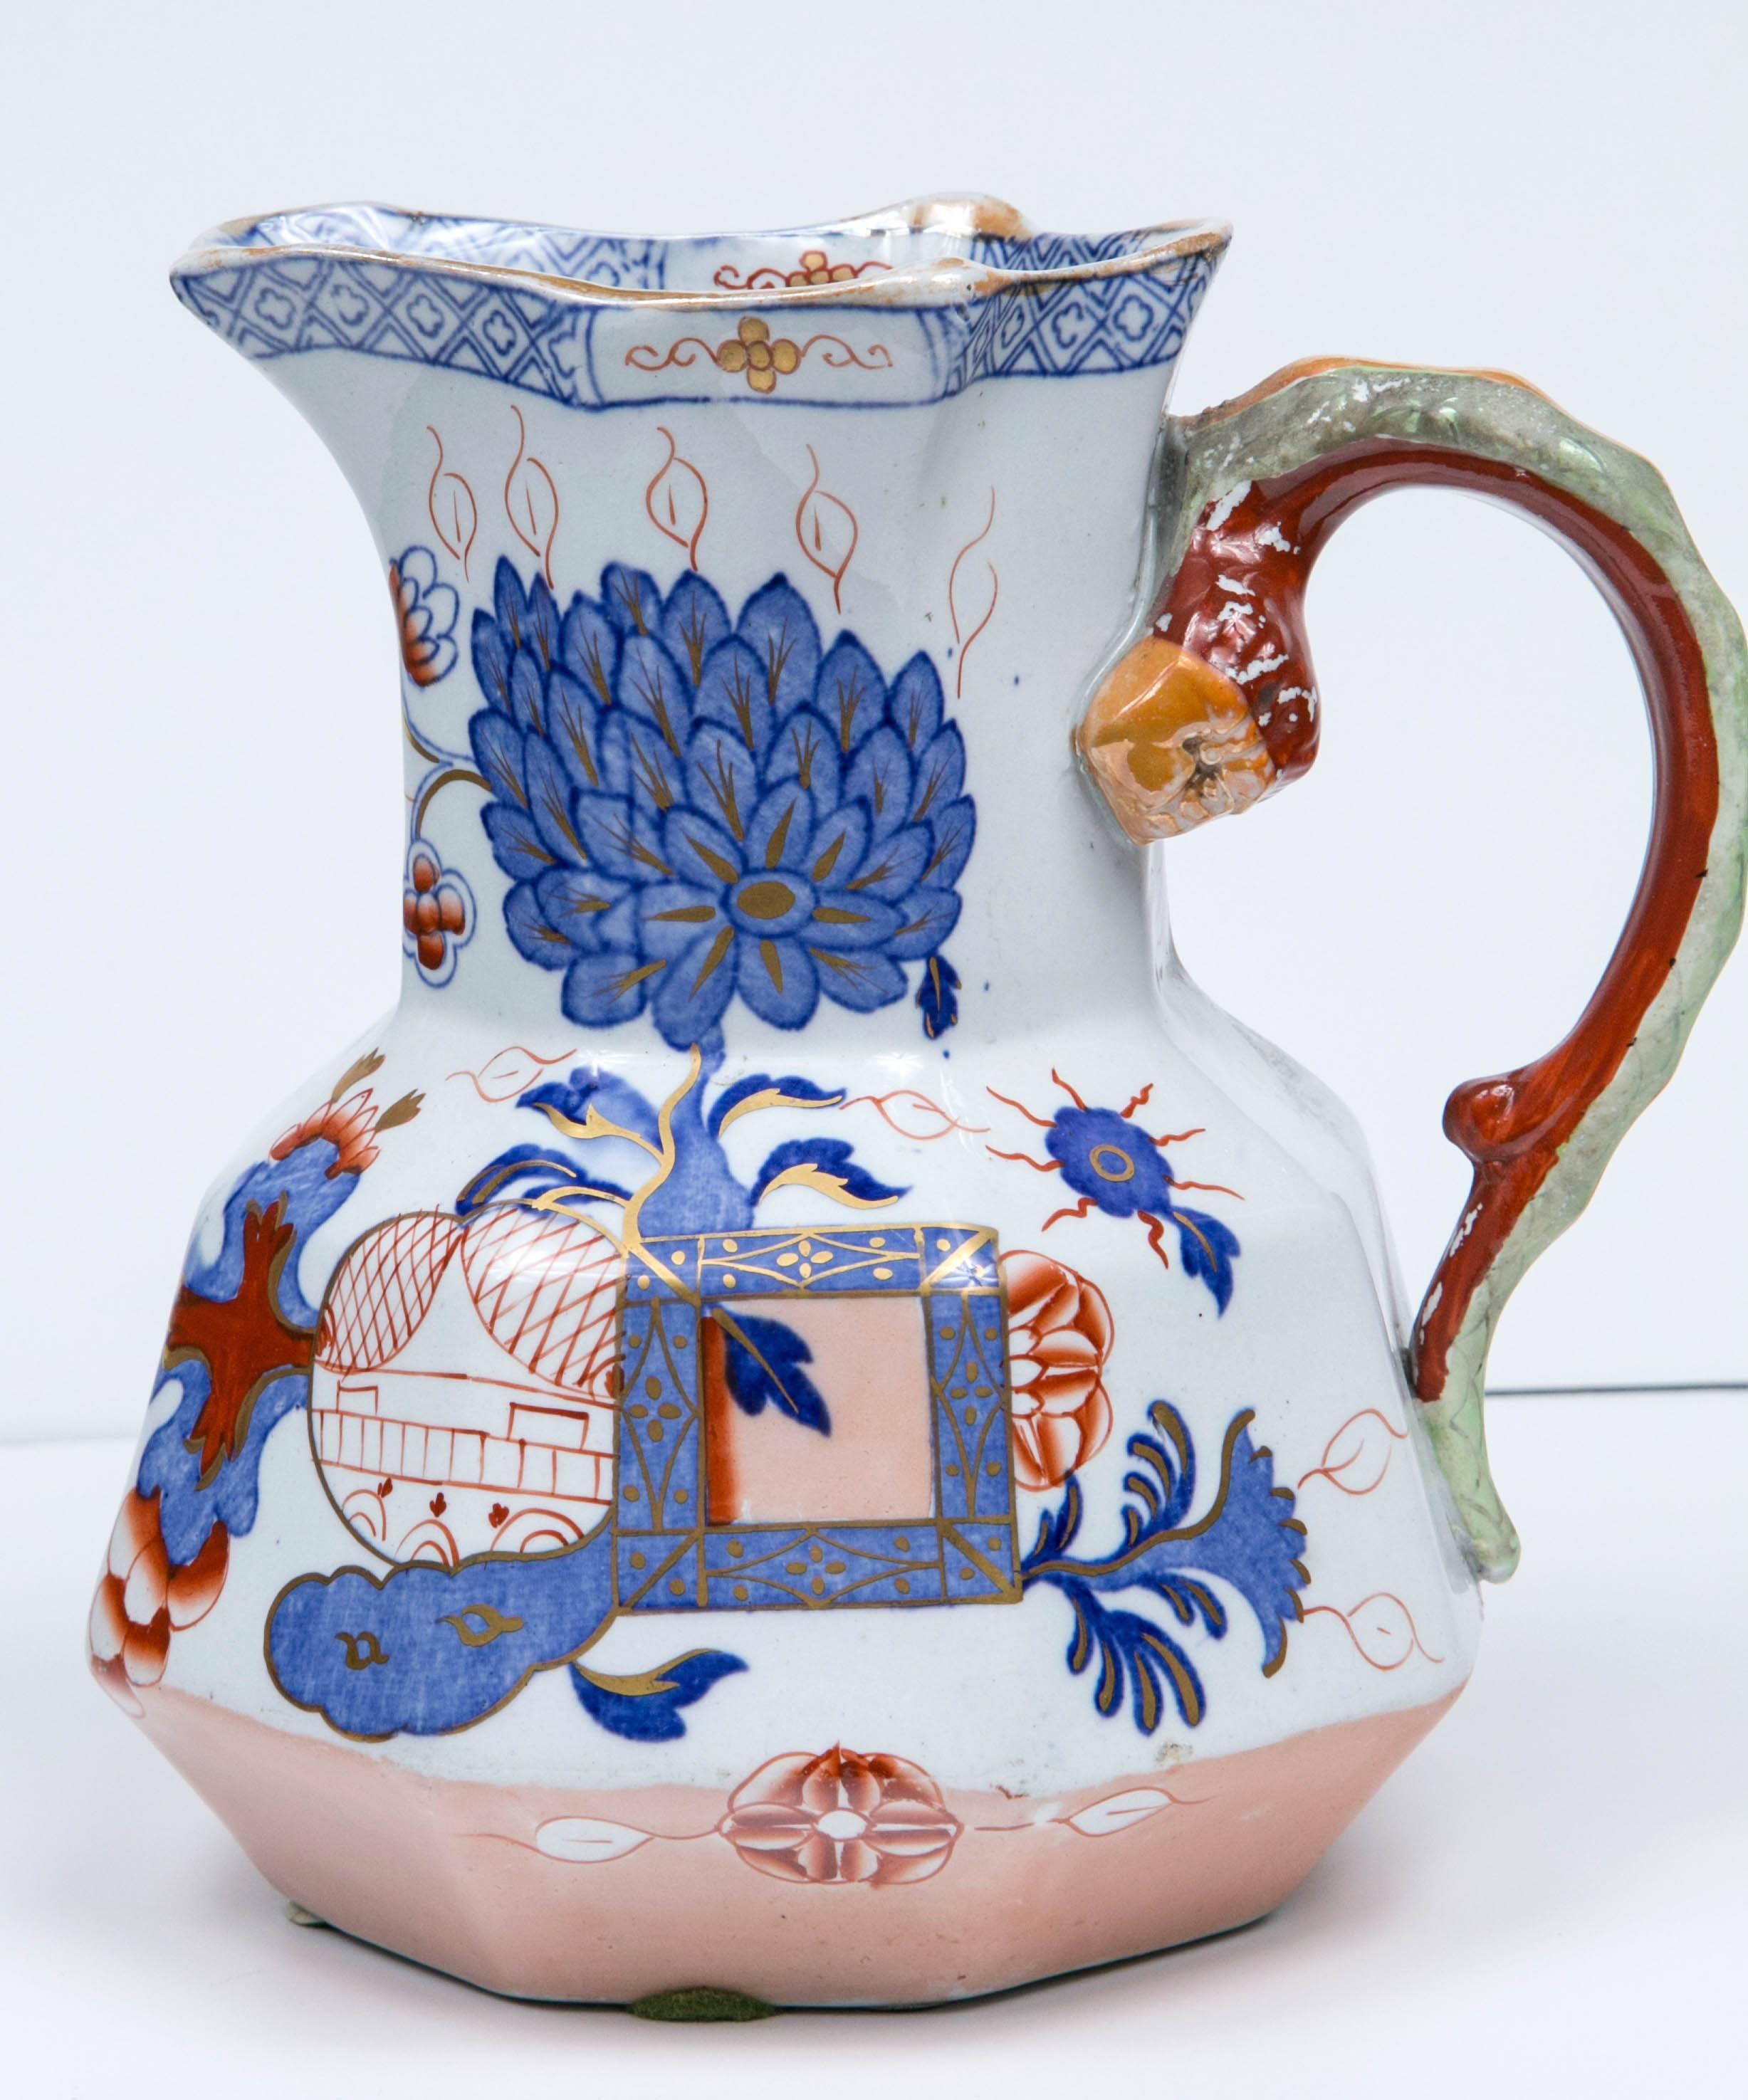 Jug by Mason's Ironstone with an octagonal shape and handle. The red and blue oriental pattern features gold leaf details.